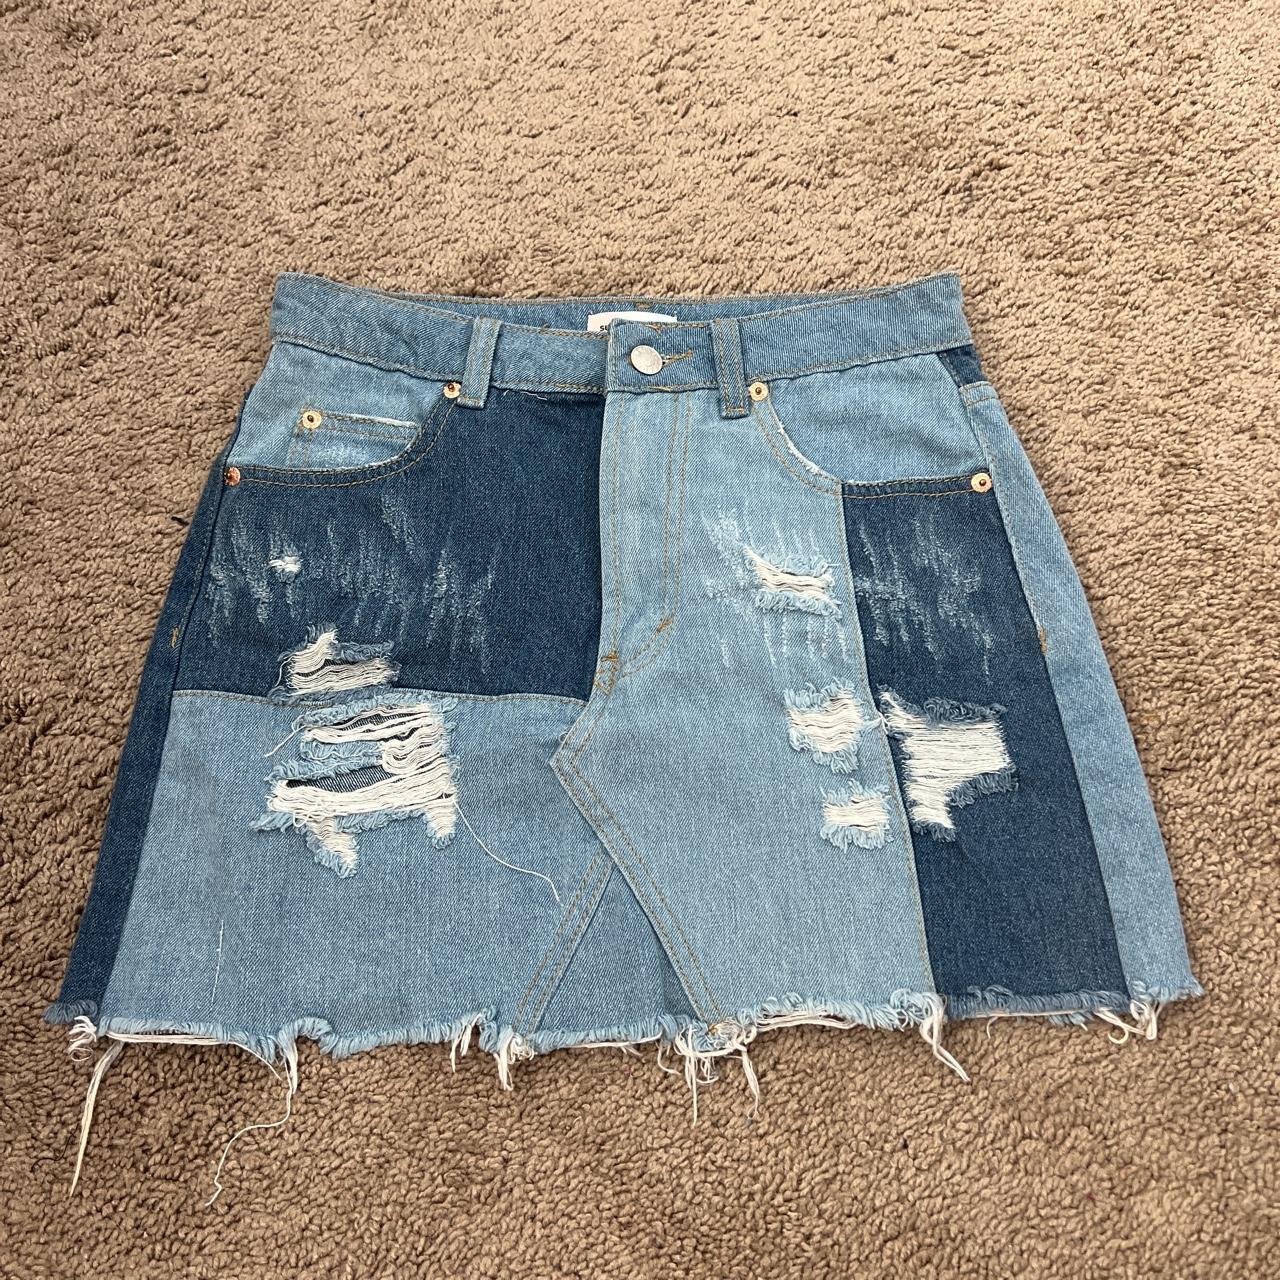 Denim patched mini skirt. Size XS. Worn once. In... - Depop